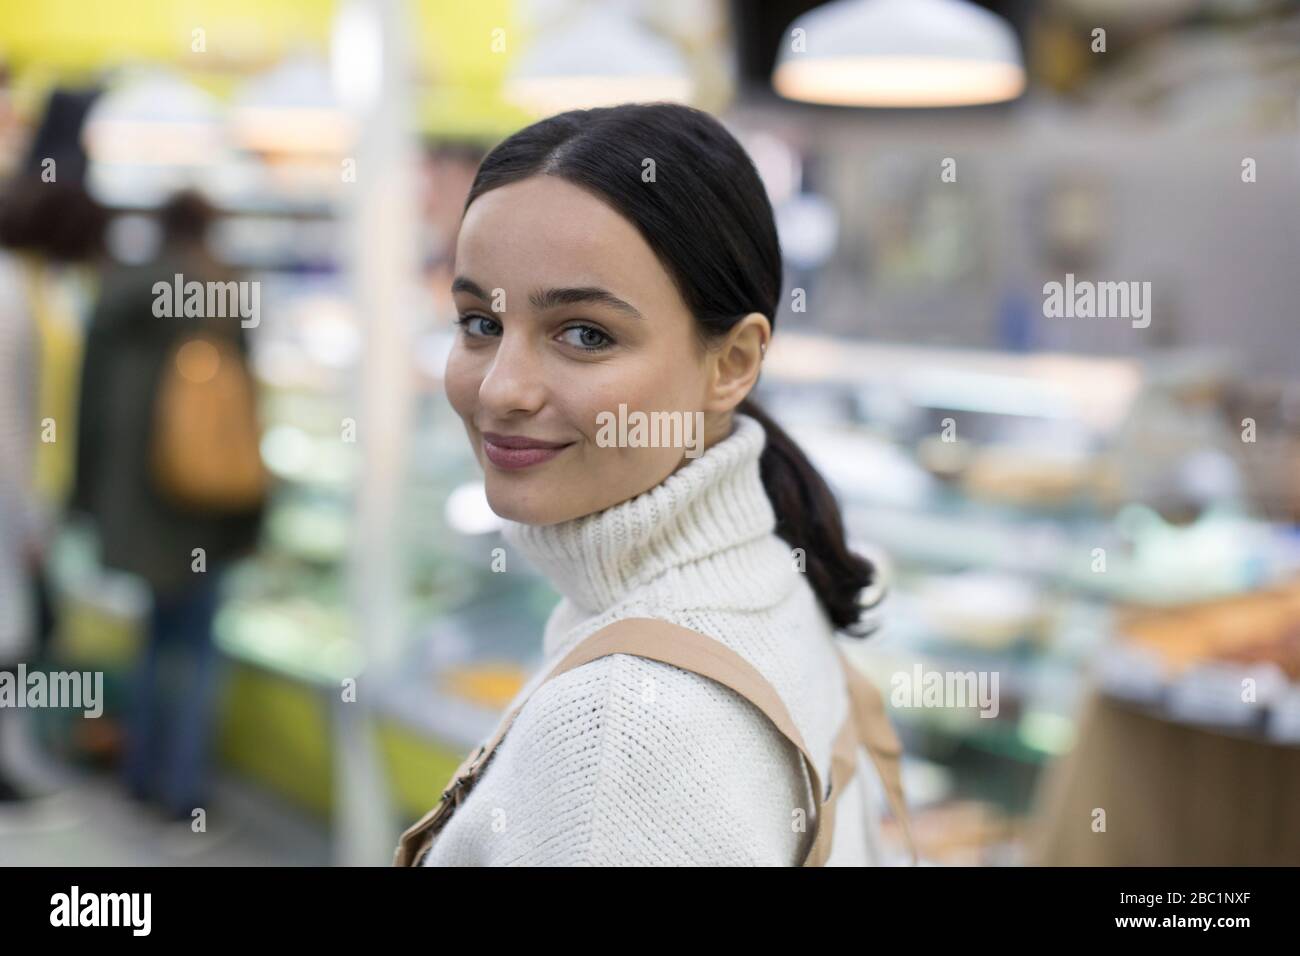 Portrait confident young woman in supermarket Stock Photo